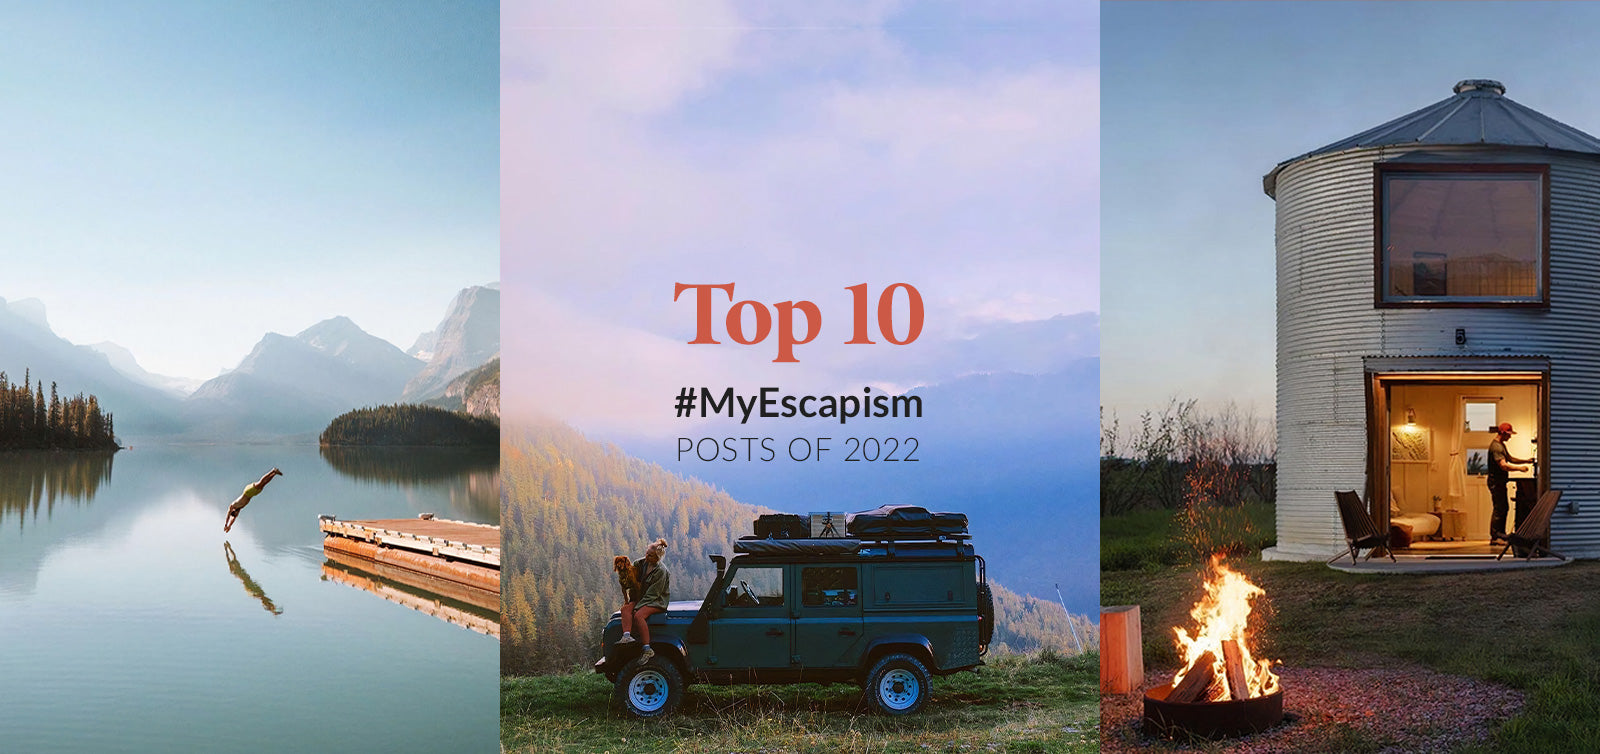 Top 10 #MyEscapism Posts of 2022